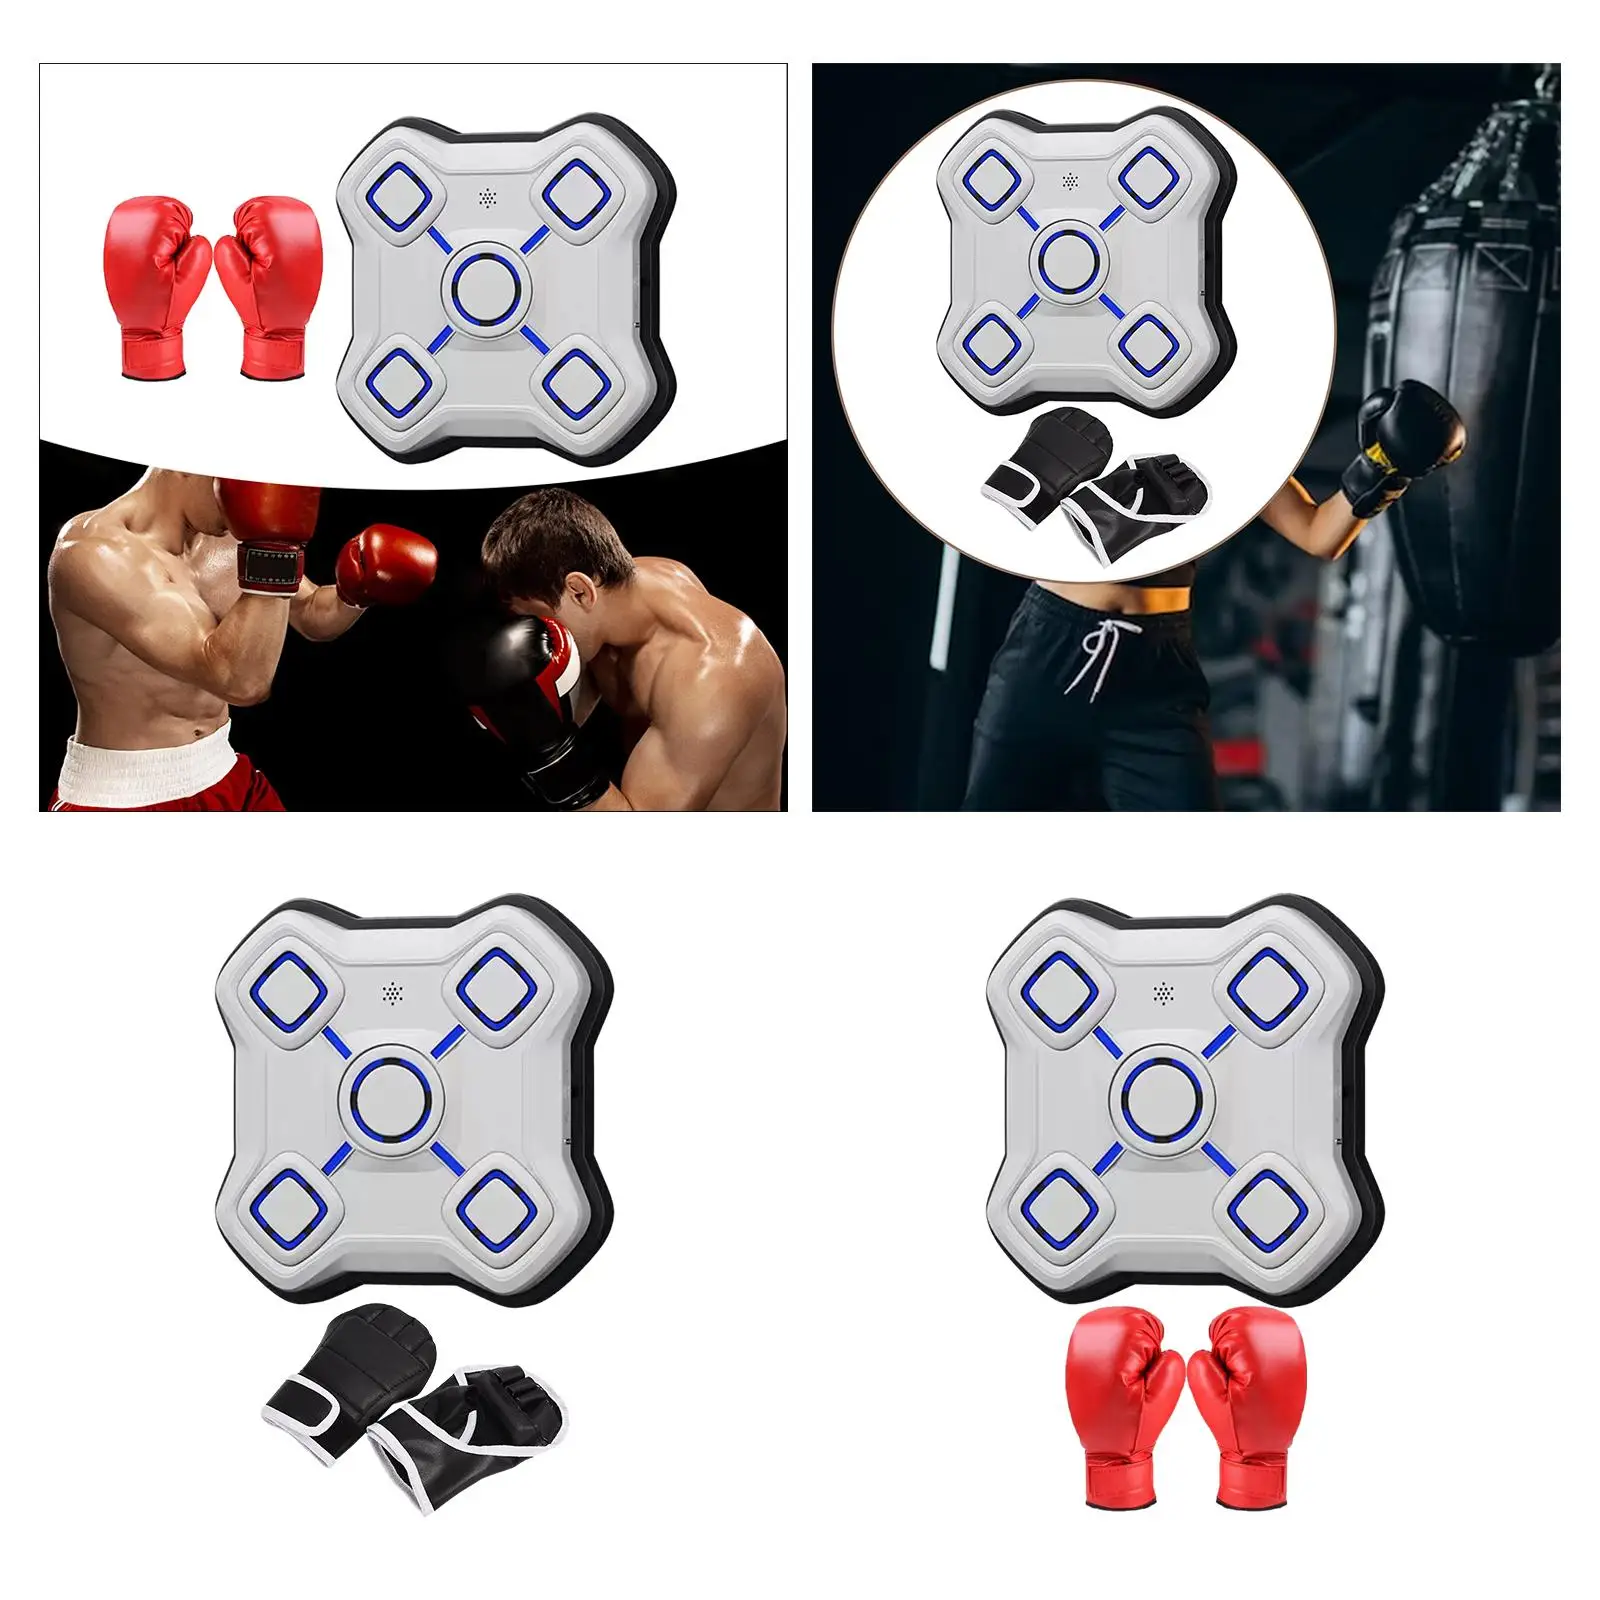 Music Boxing Machine Smart Boxing Trainer Electronic Boxing Wall Target for Strength Training Focus Kickboxing Indoor Agility